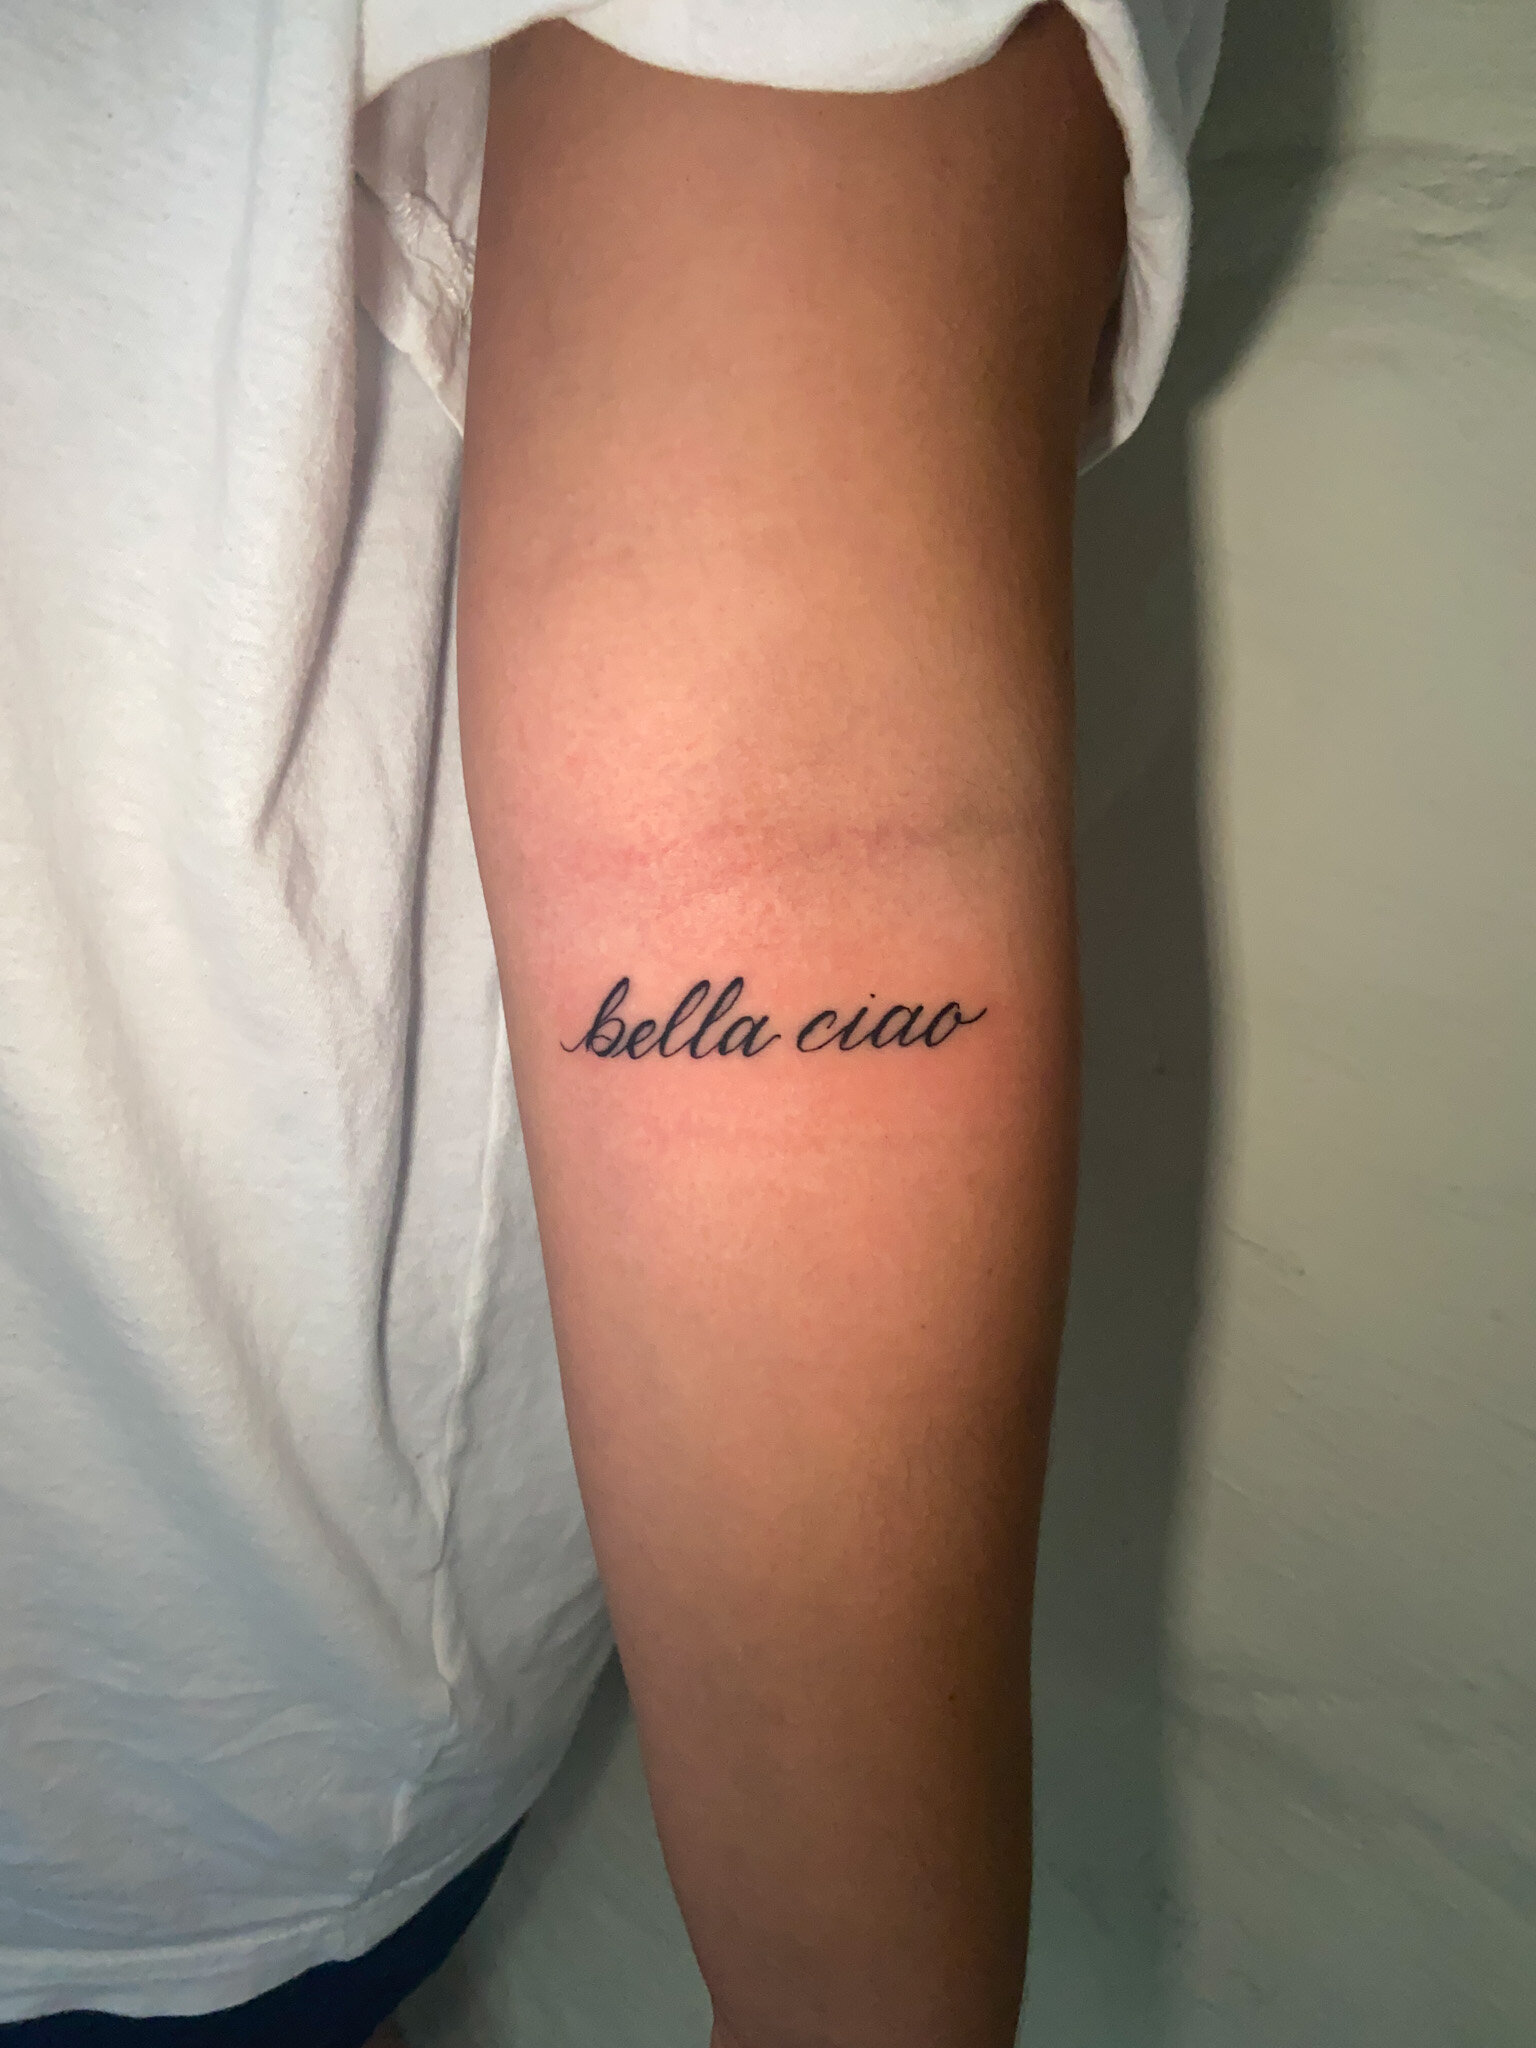  script lettering tattoo of the words “bella ciao” on a forearm 